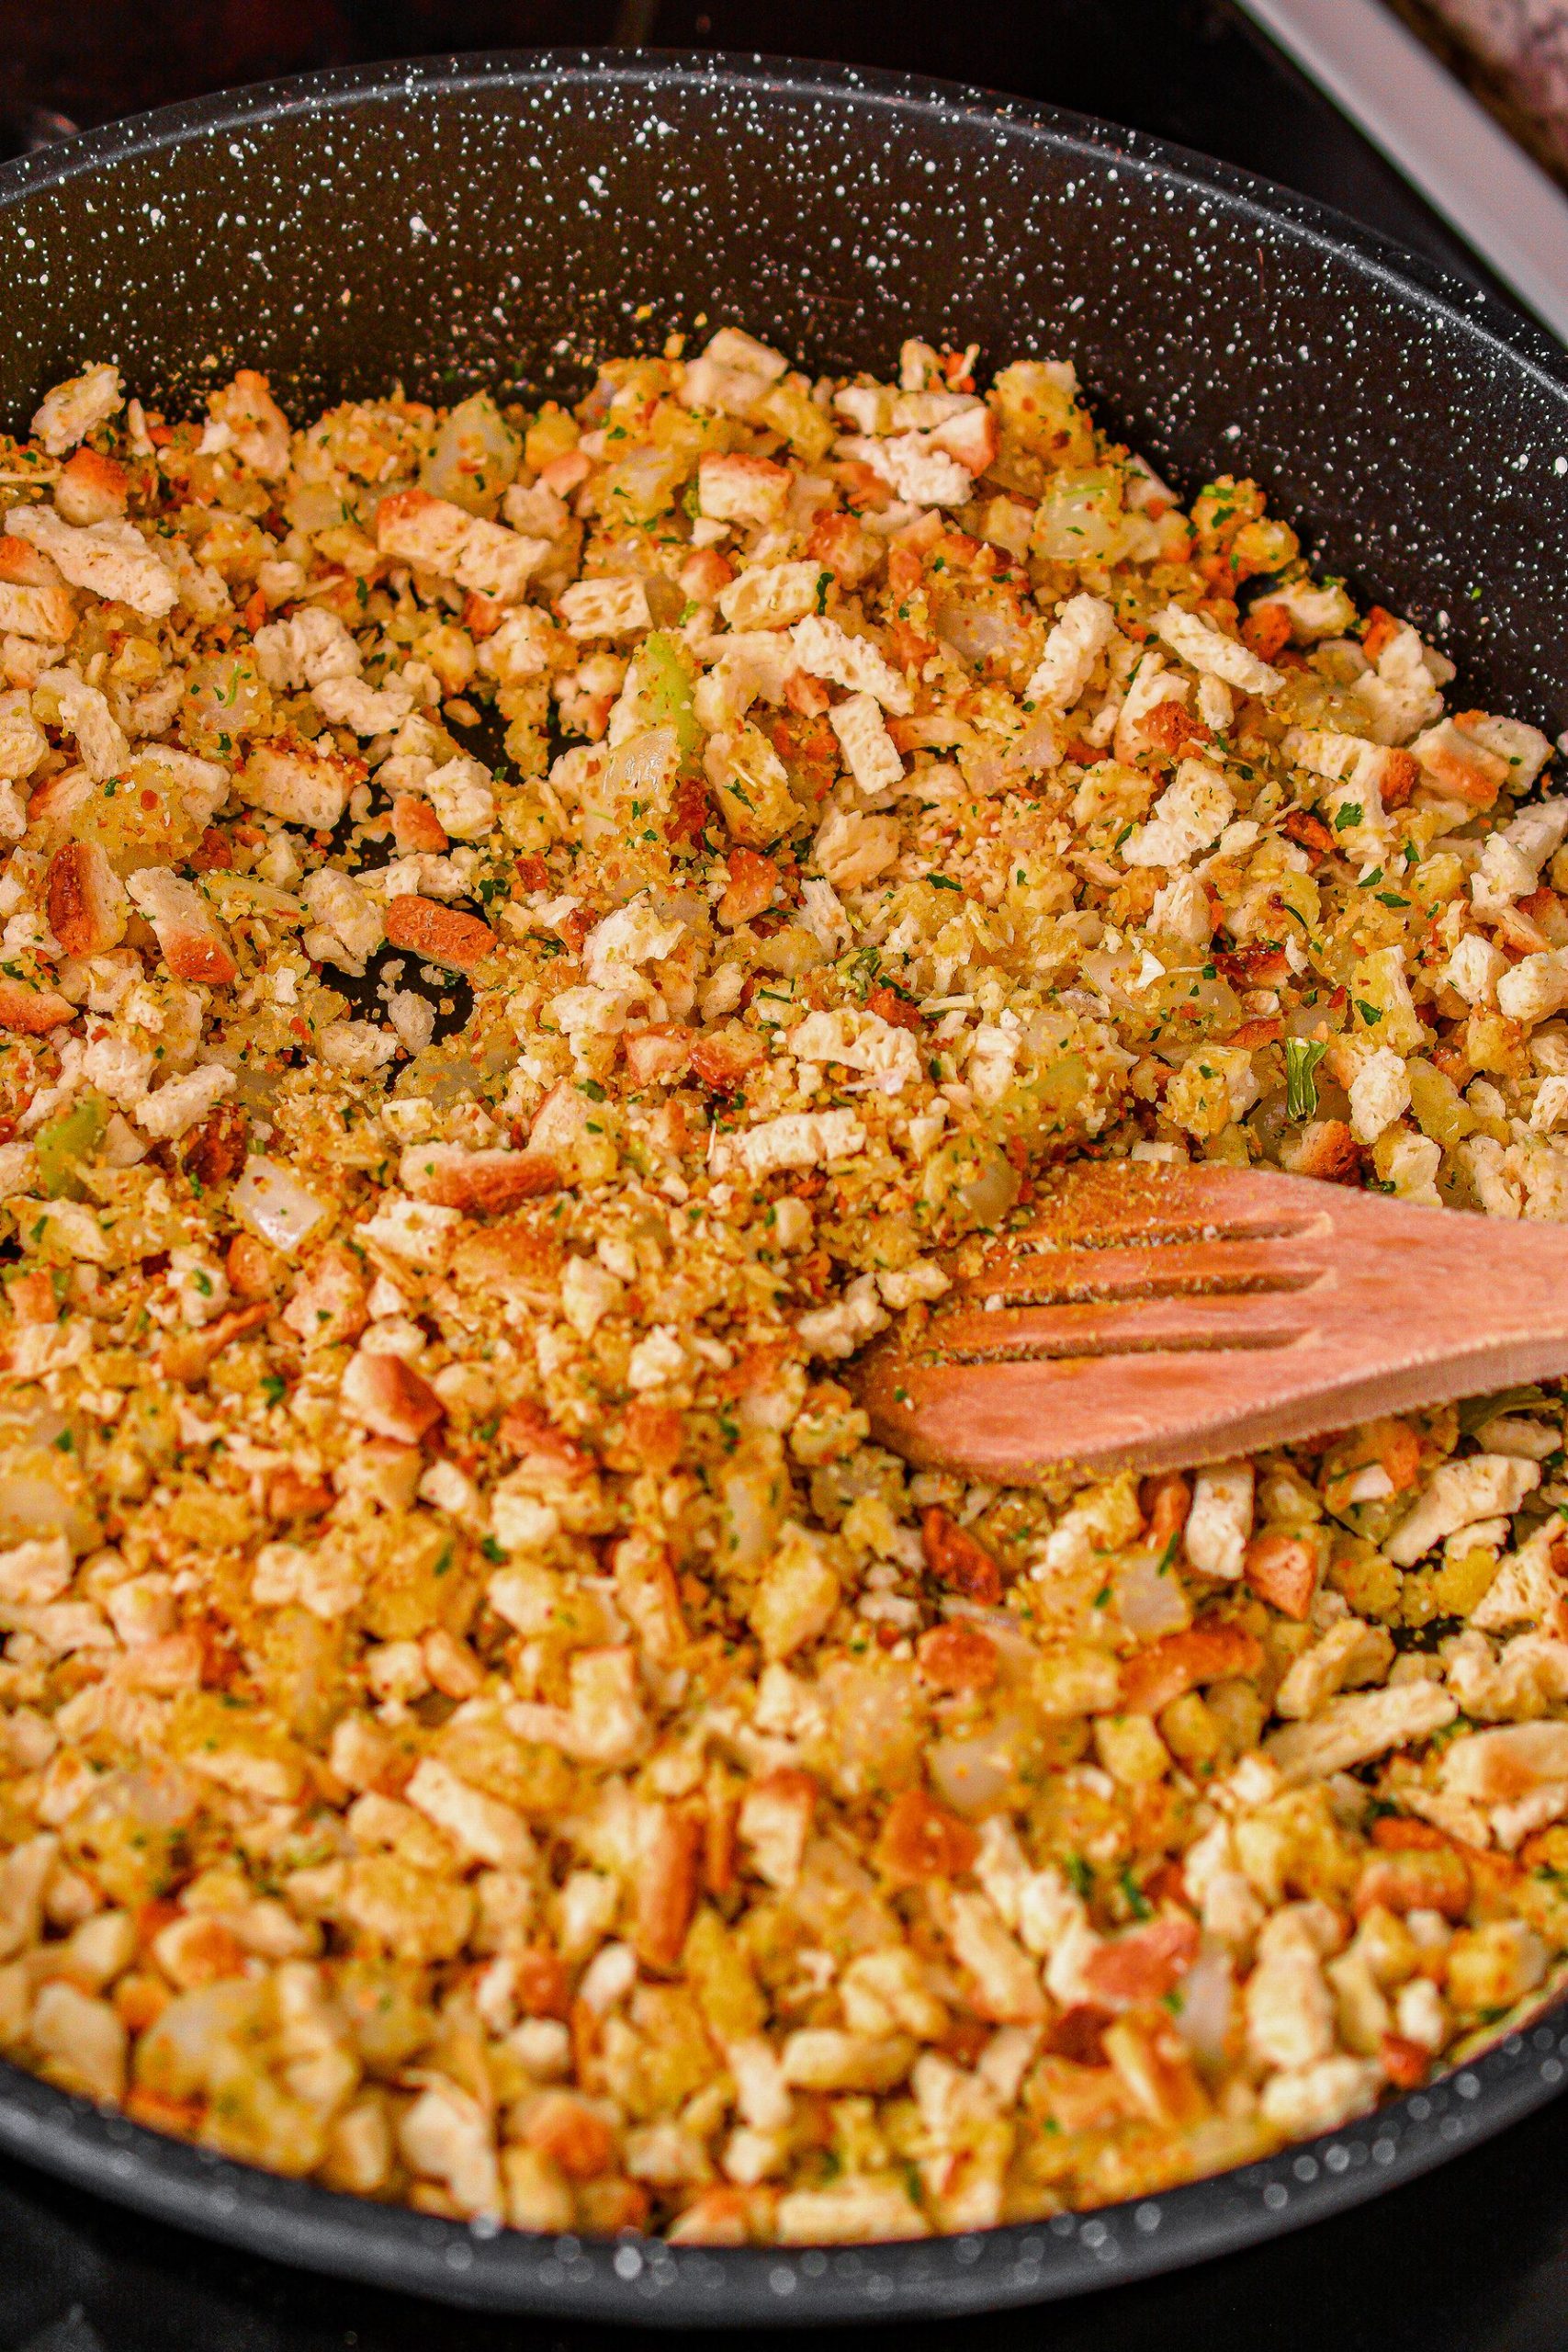 Place the onions and stuffing in the pan, and saute until the onions begin to soften.